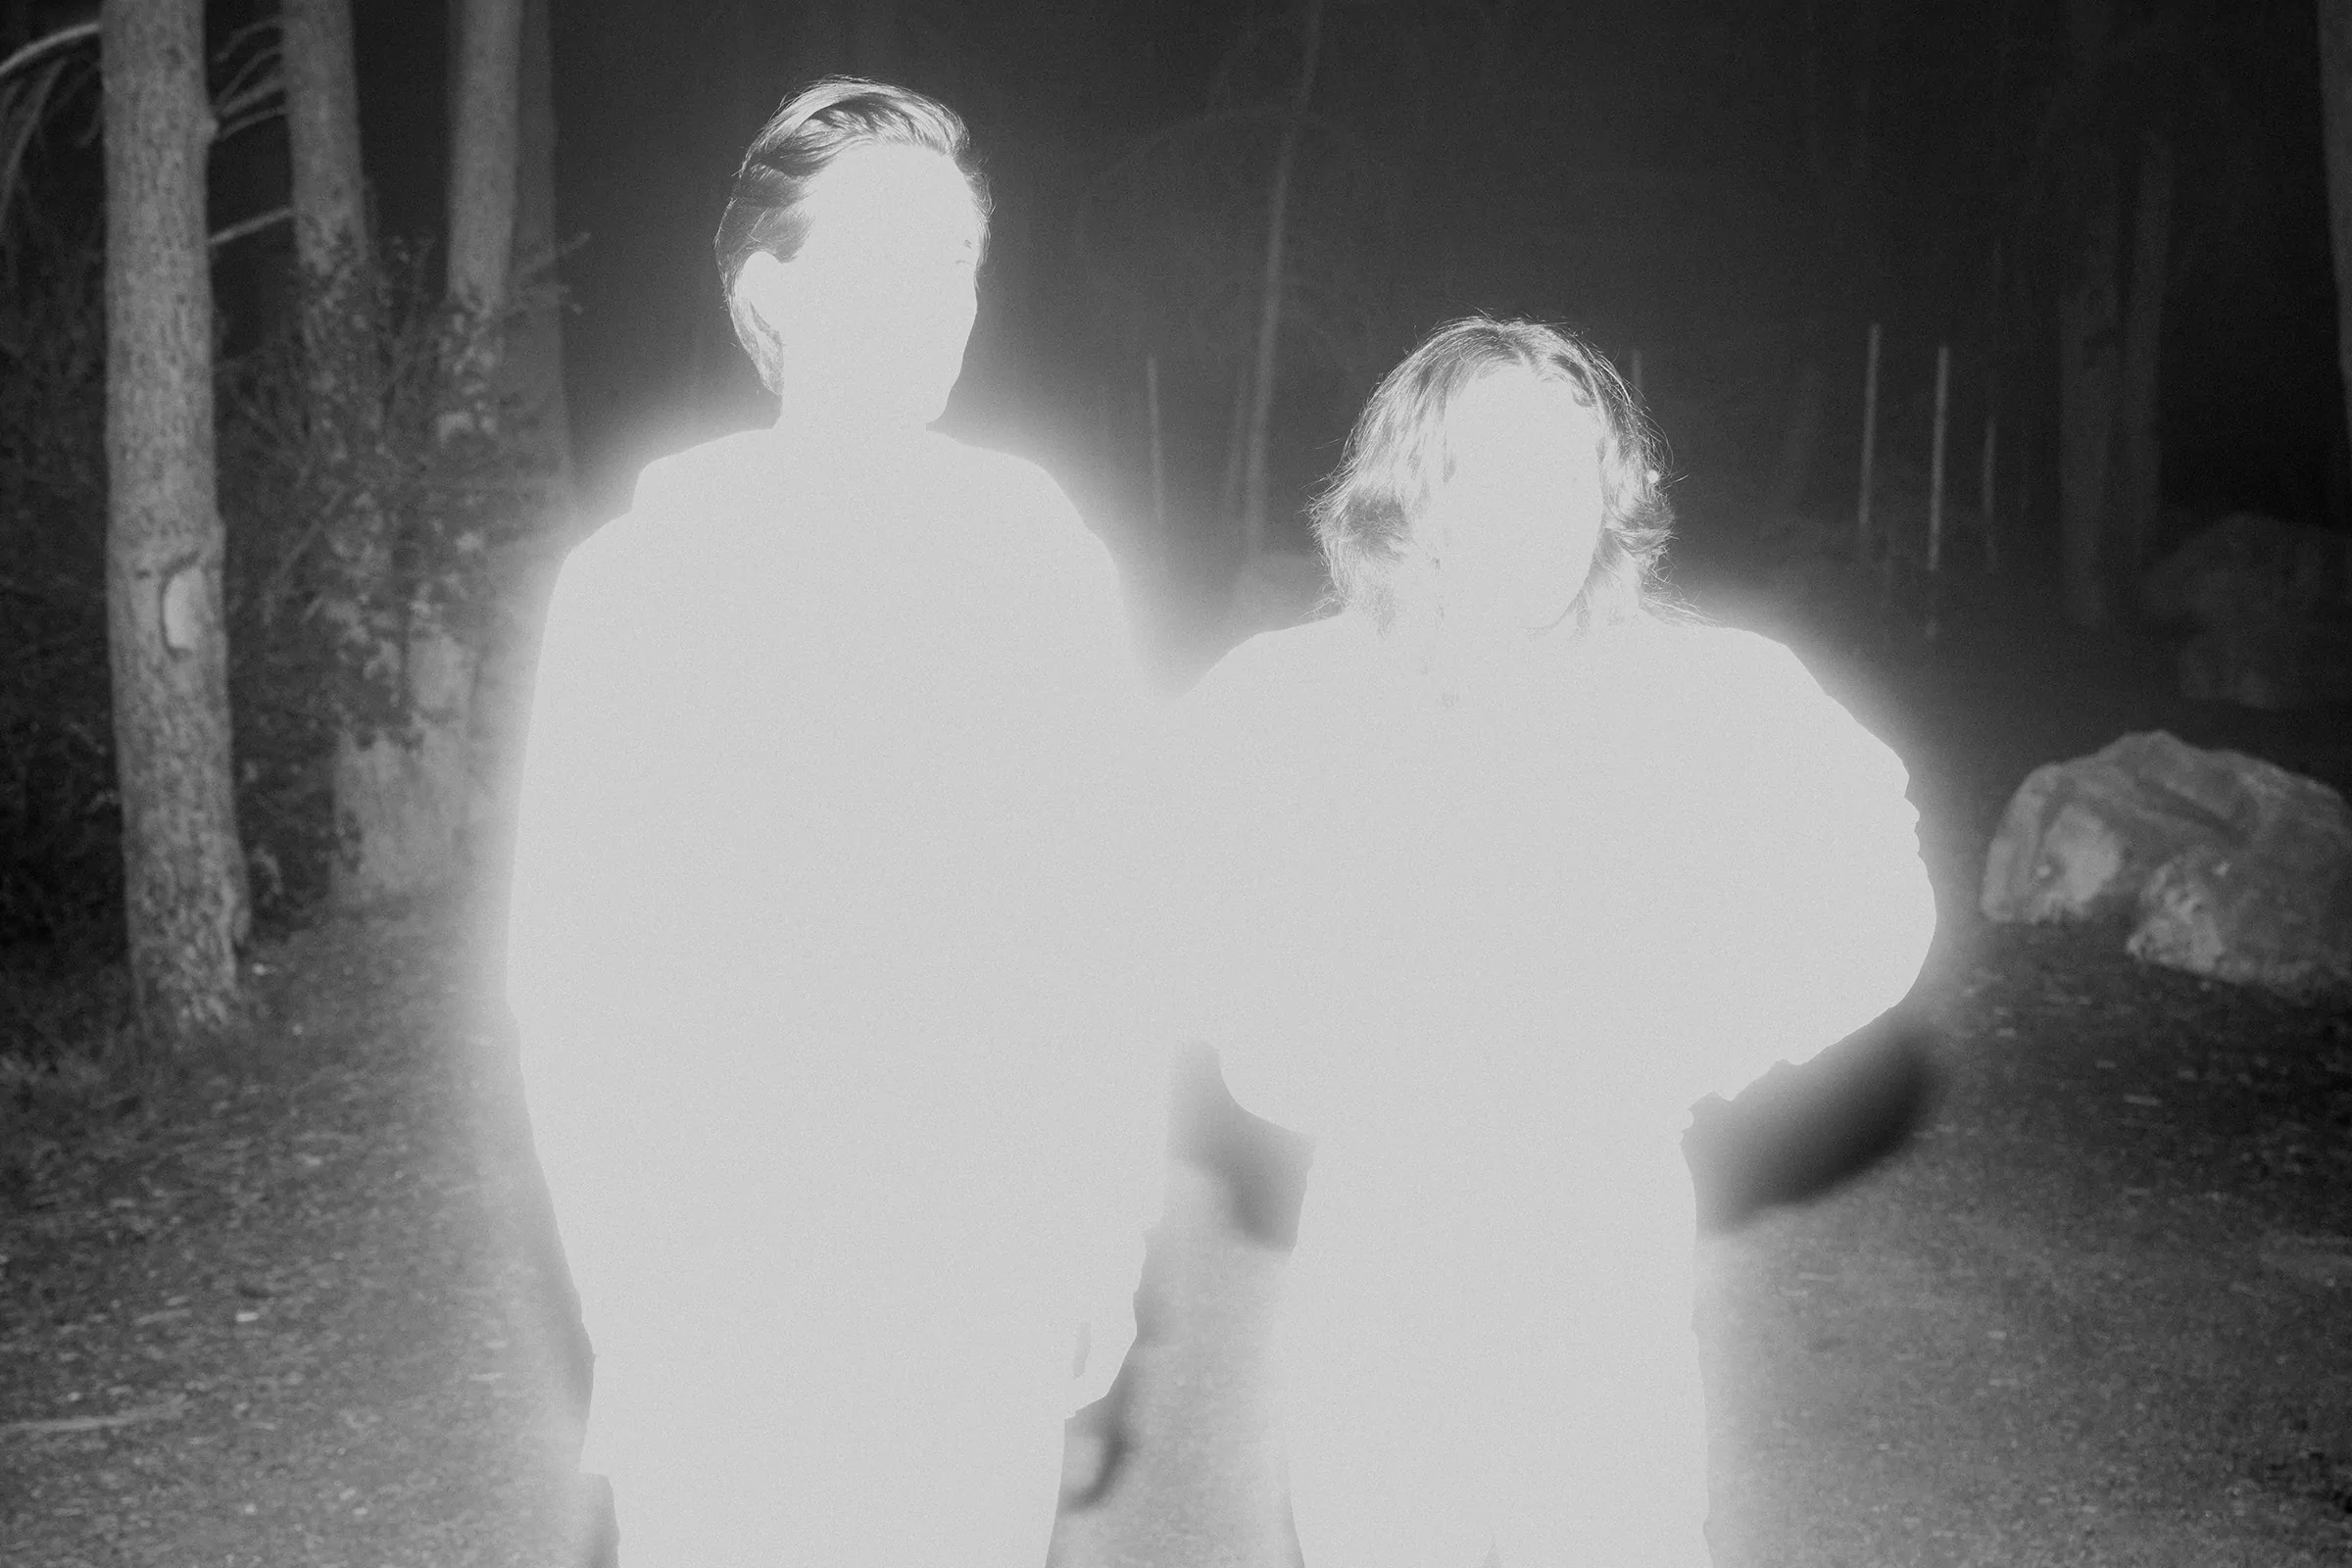 PURITY RING announce their third album WOMB out April 3rd